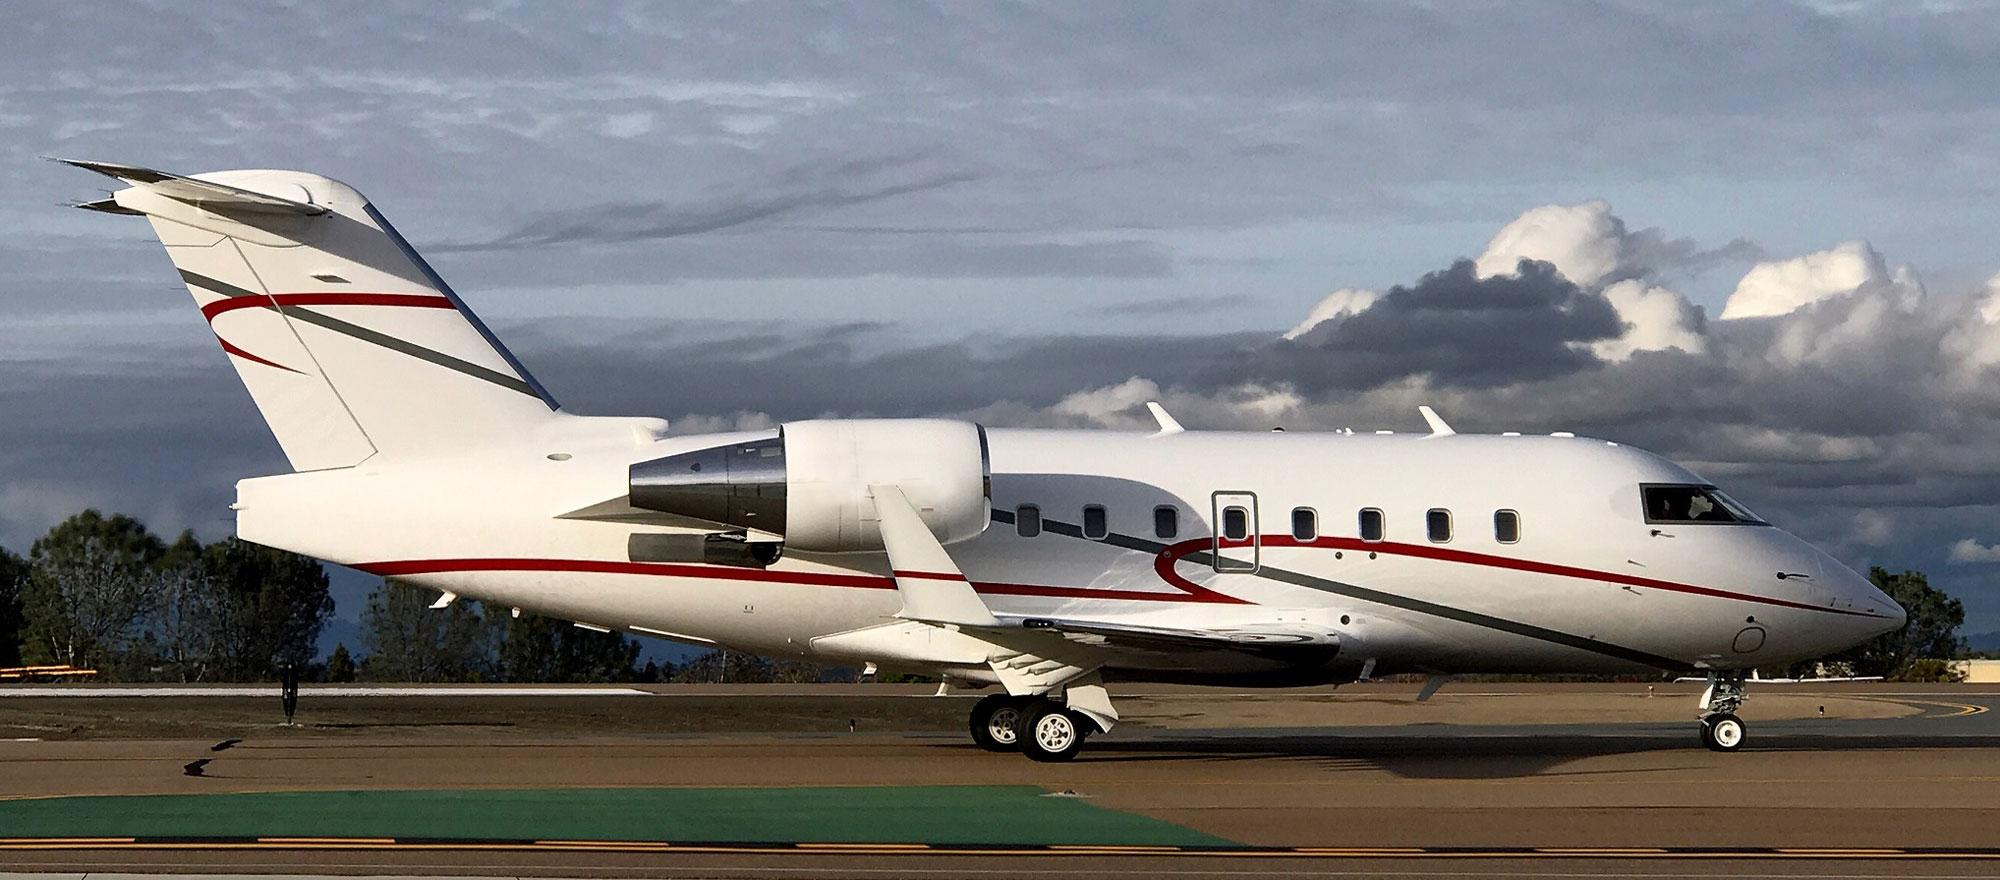 Dr. Hariri's current jet is a tricked out Challenger 604 XT.